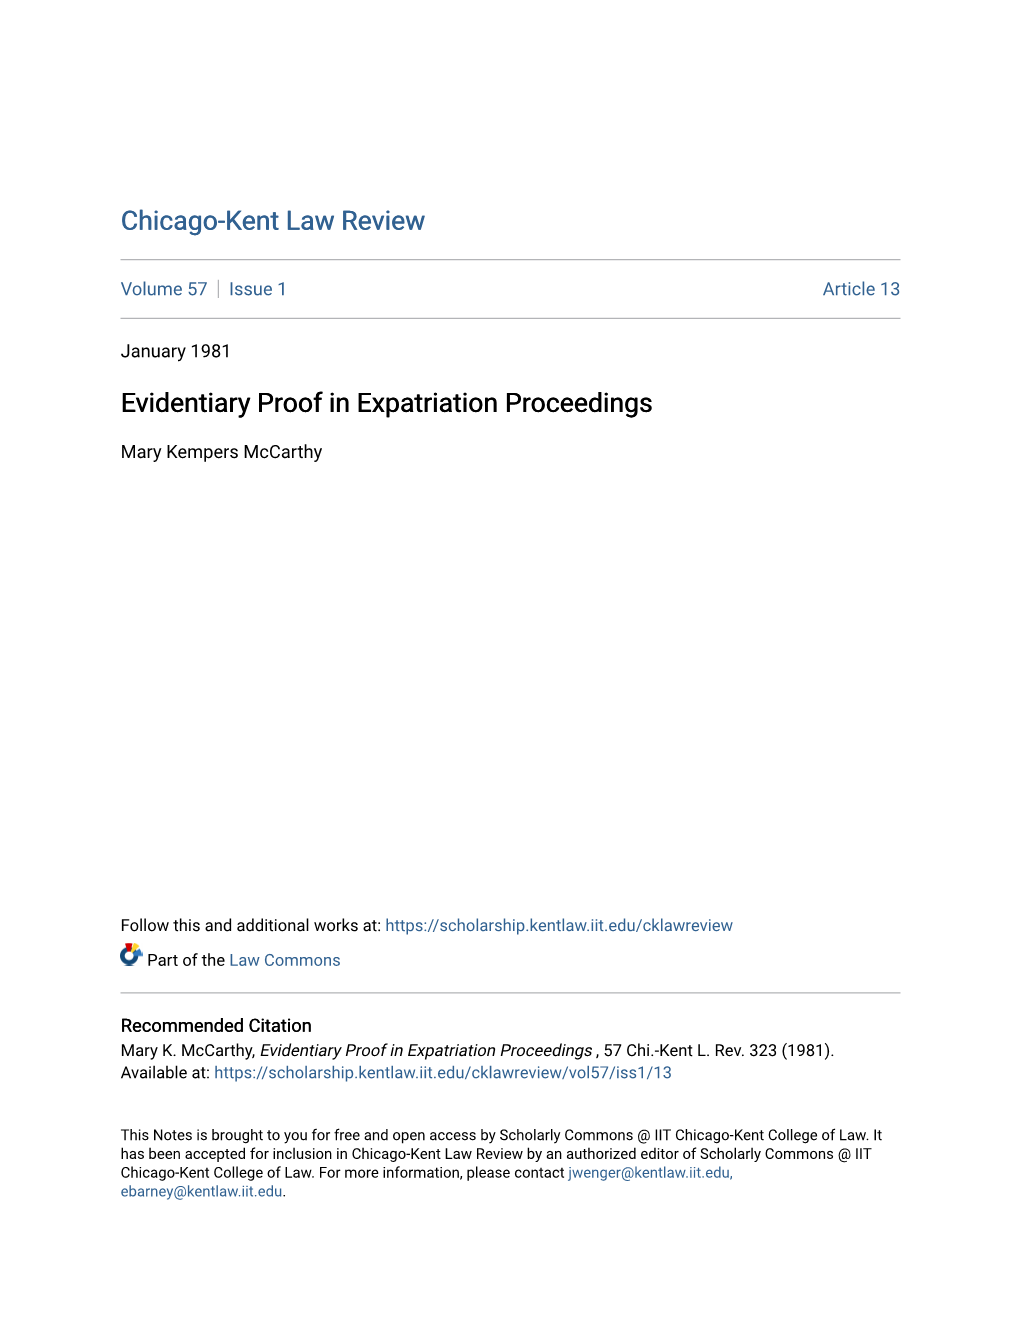 Evidentiary Proof in Expatriation Proceedings